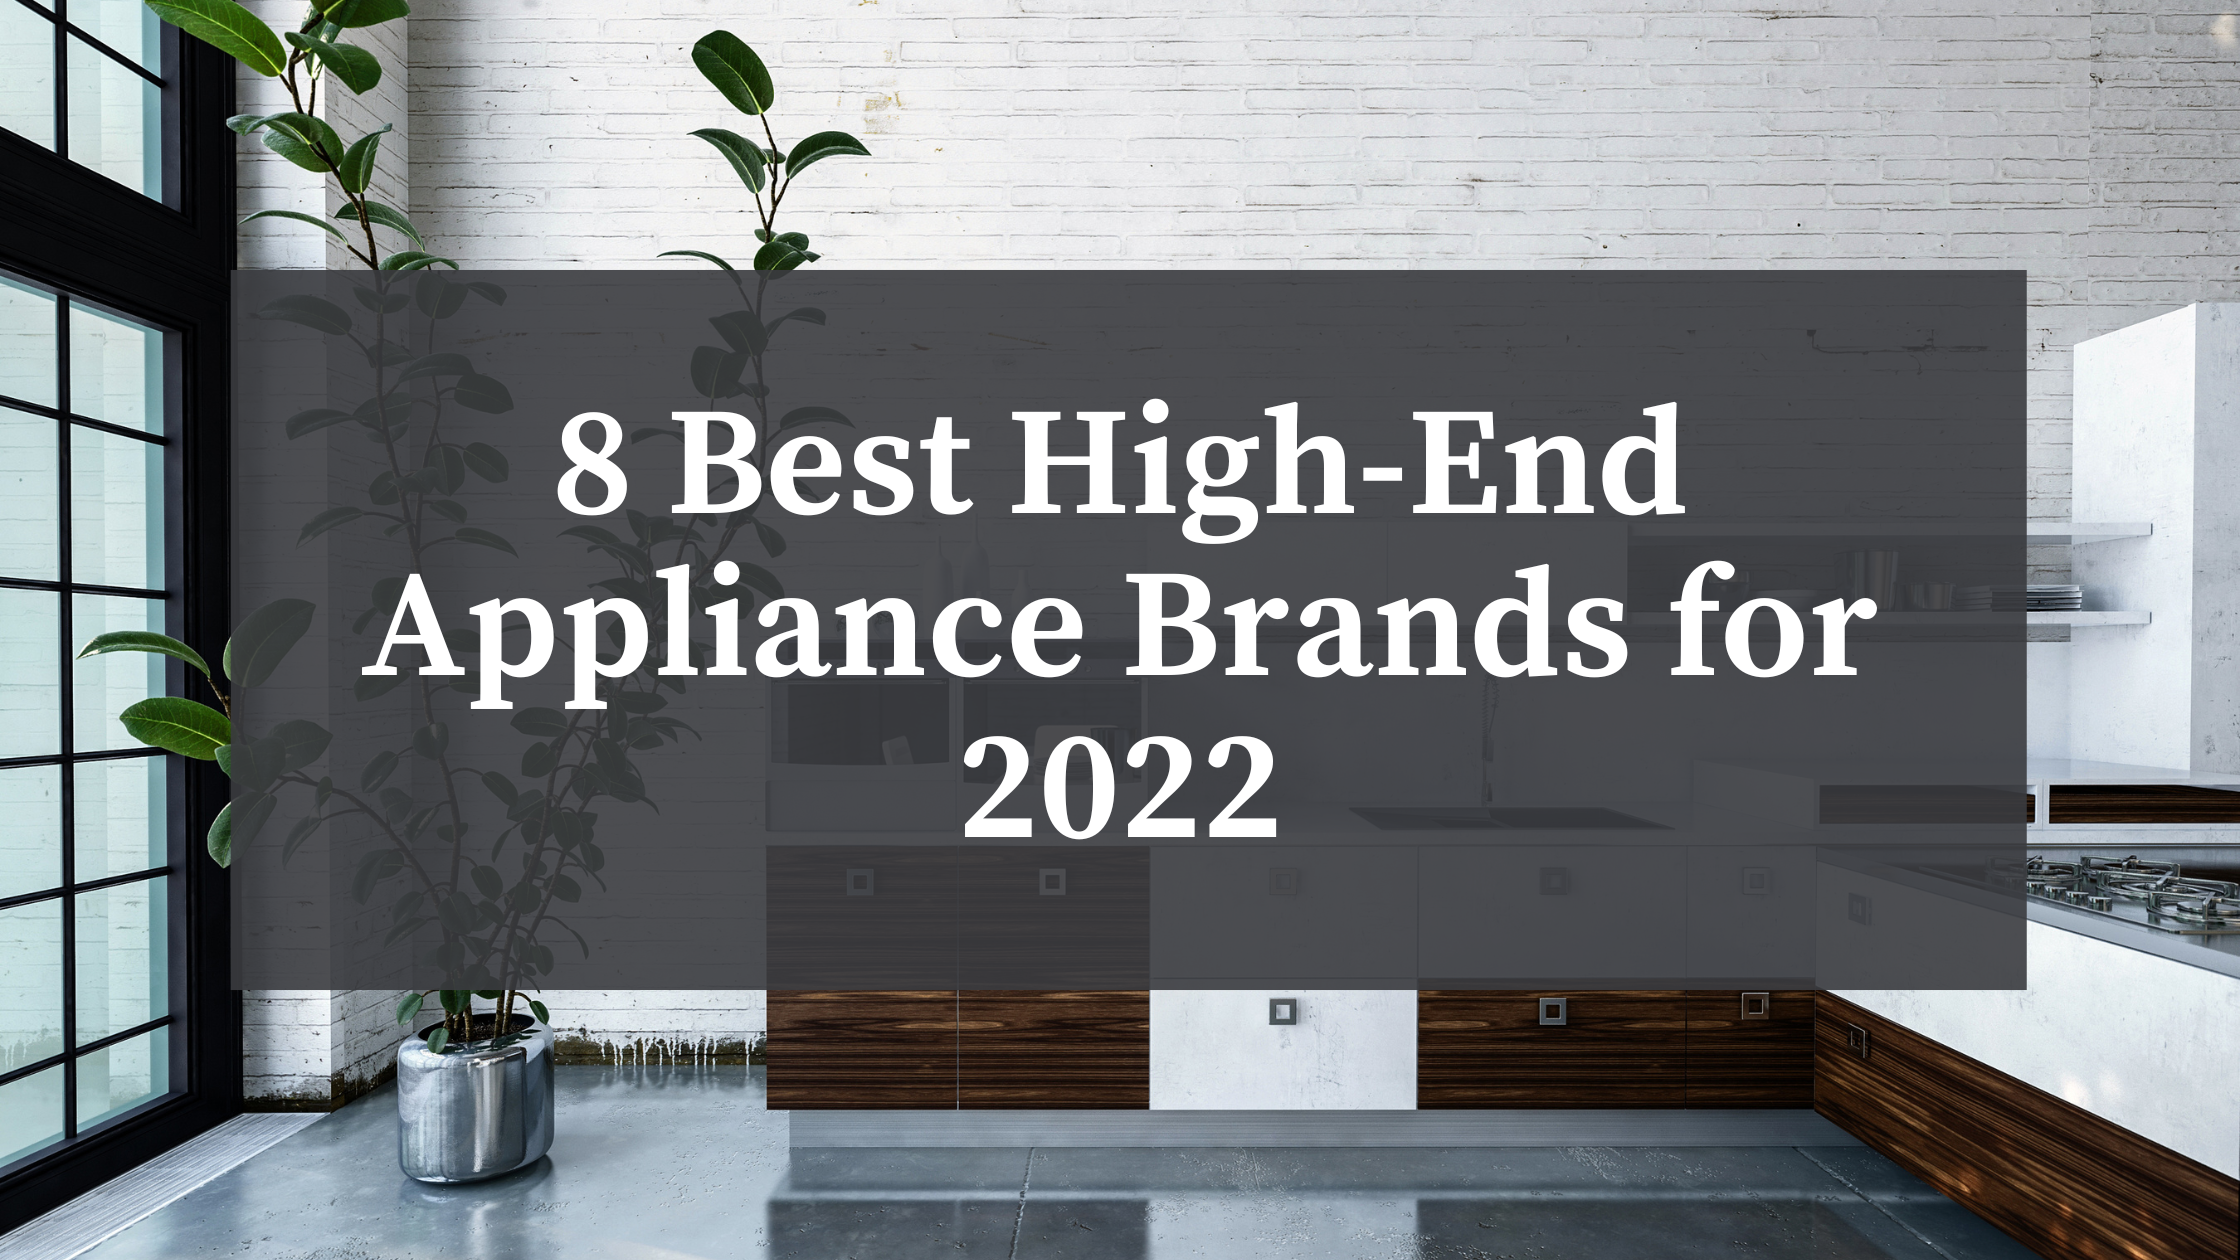 https://blog.bscculinary.com/wp-content/uploads/2022/06/8-Best-Luxury-Appliance-Brands.png